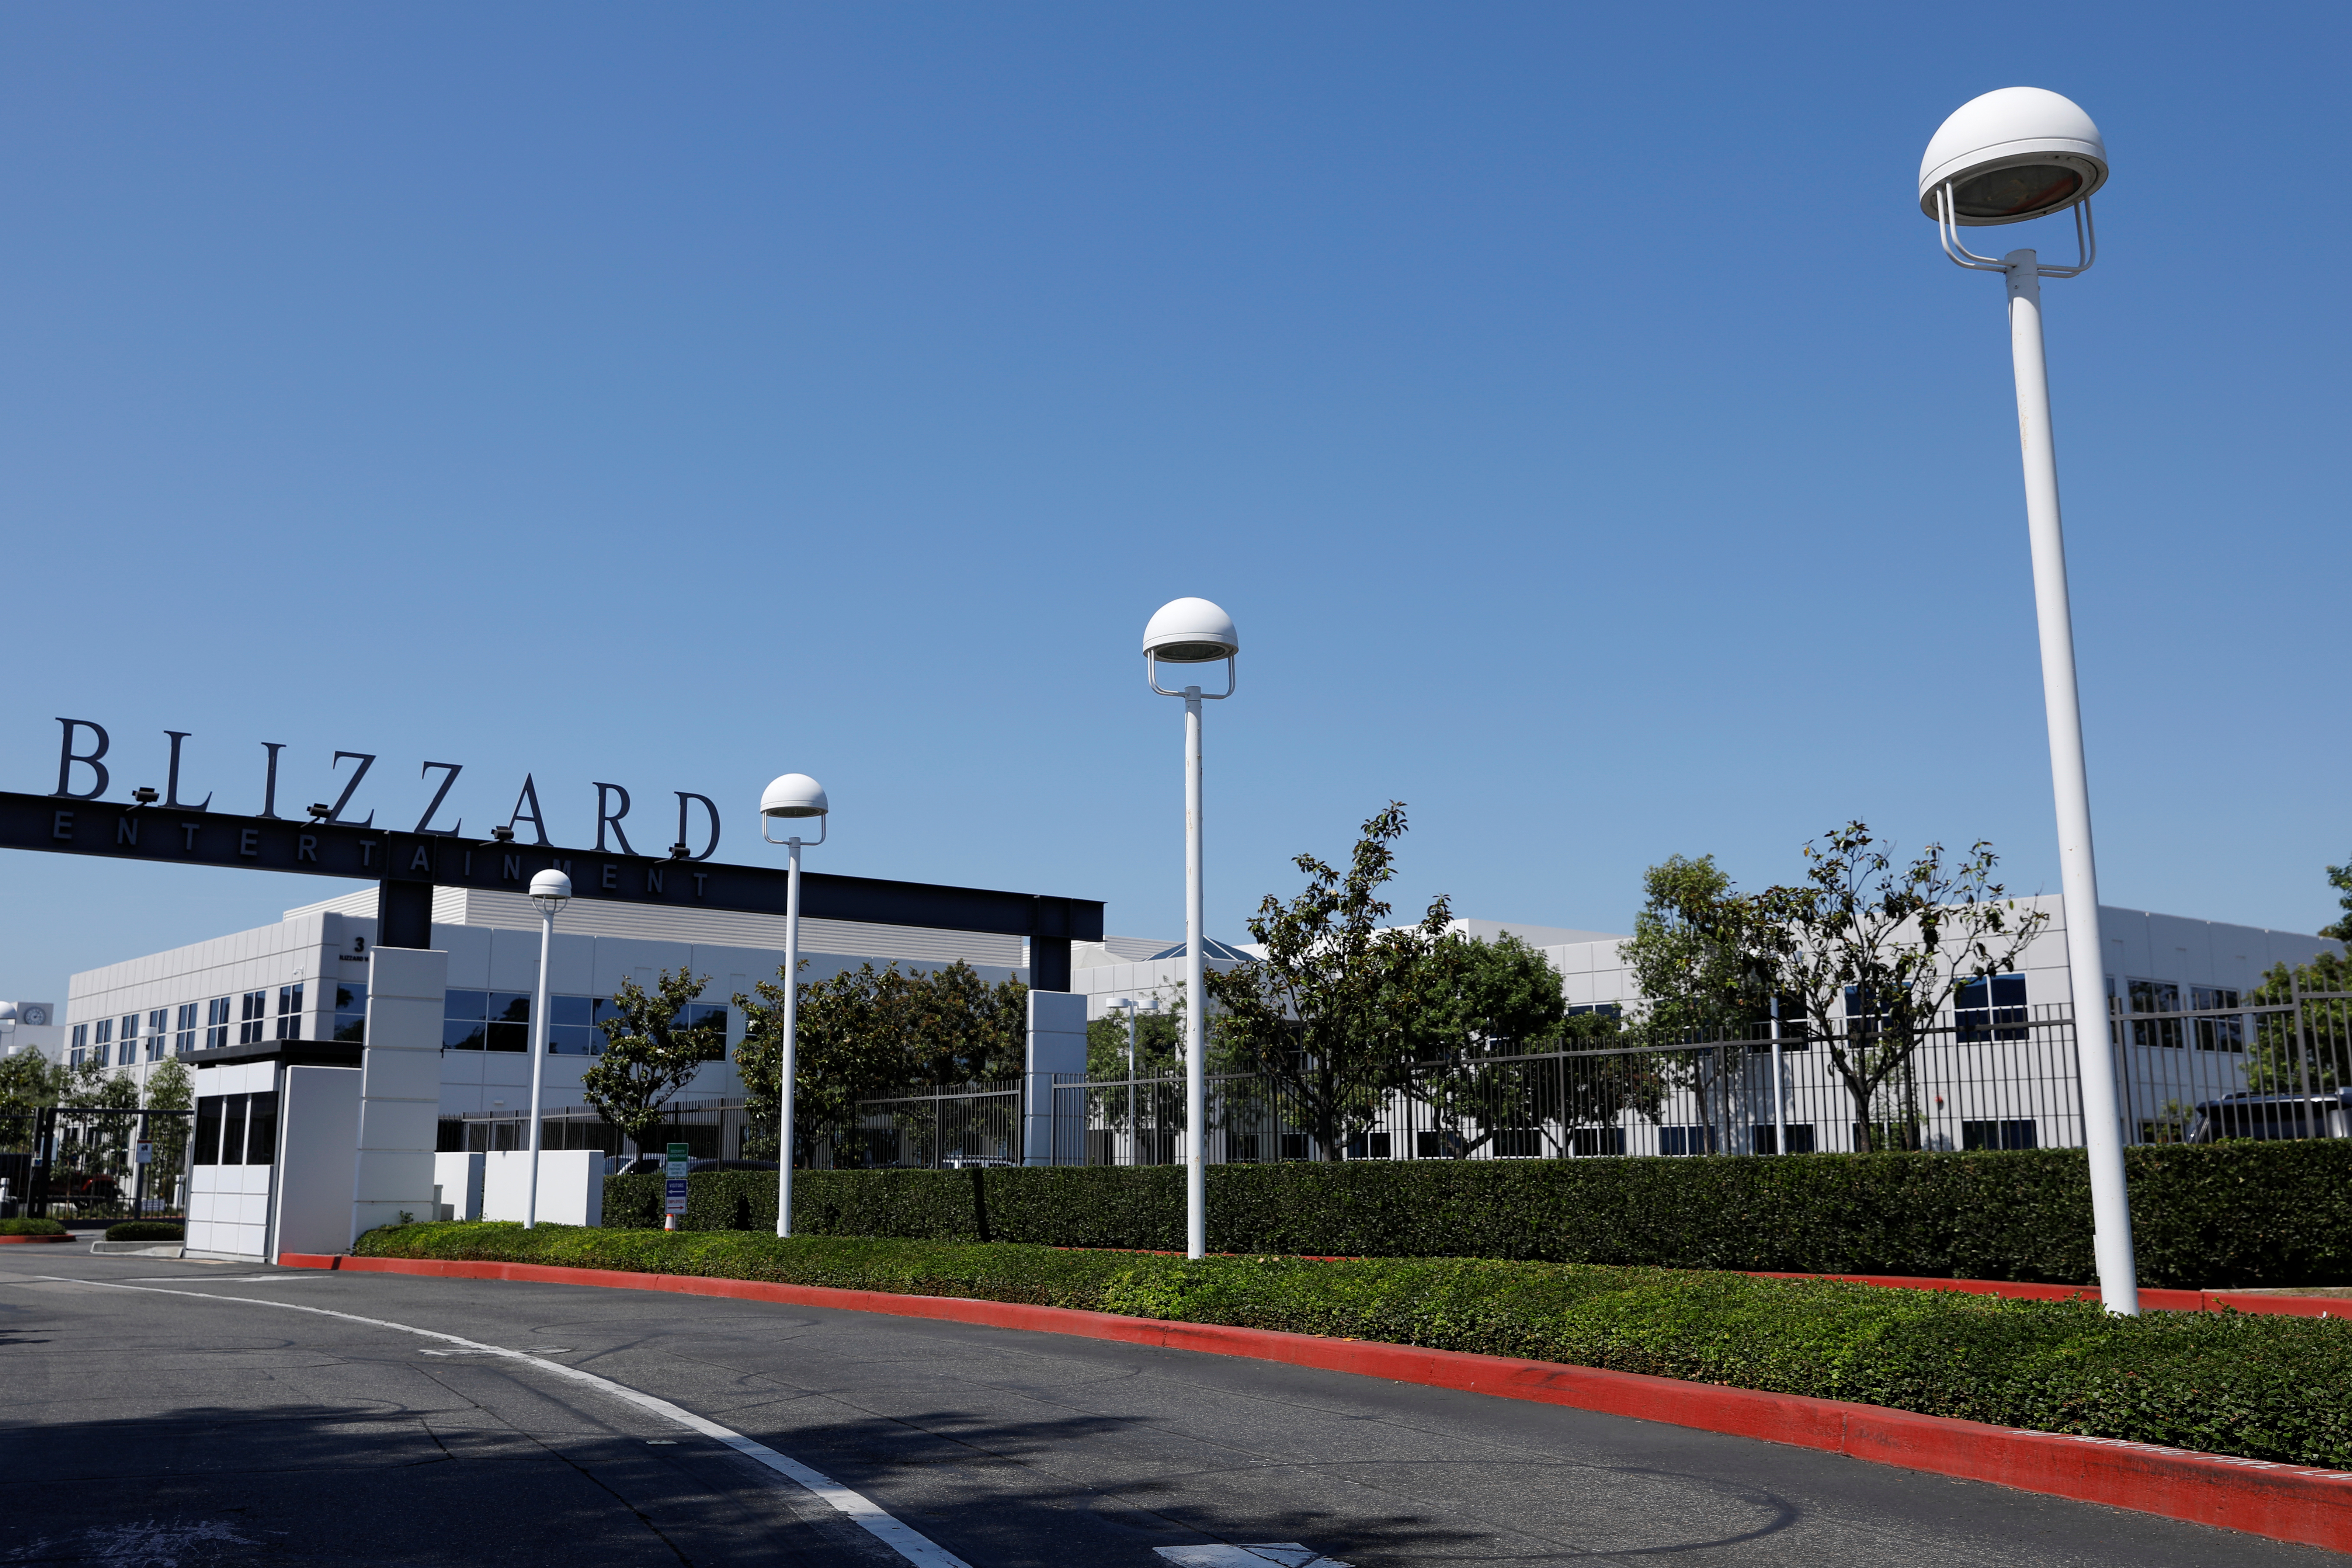 The entrance to Activision Blizzard Inc.  campus will be shown in Irvine, California, USA, on August 6, 2019. REUTERS / Mike Blake